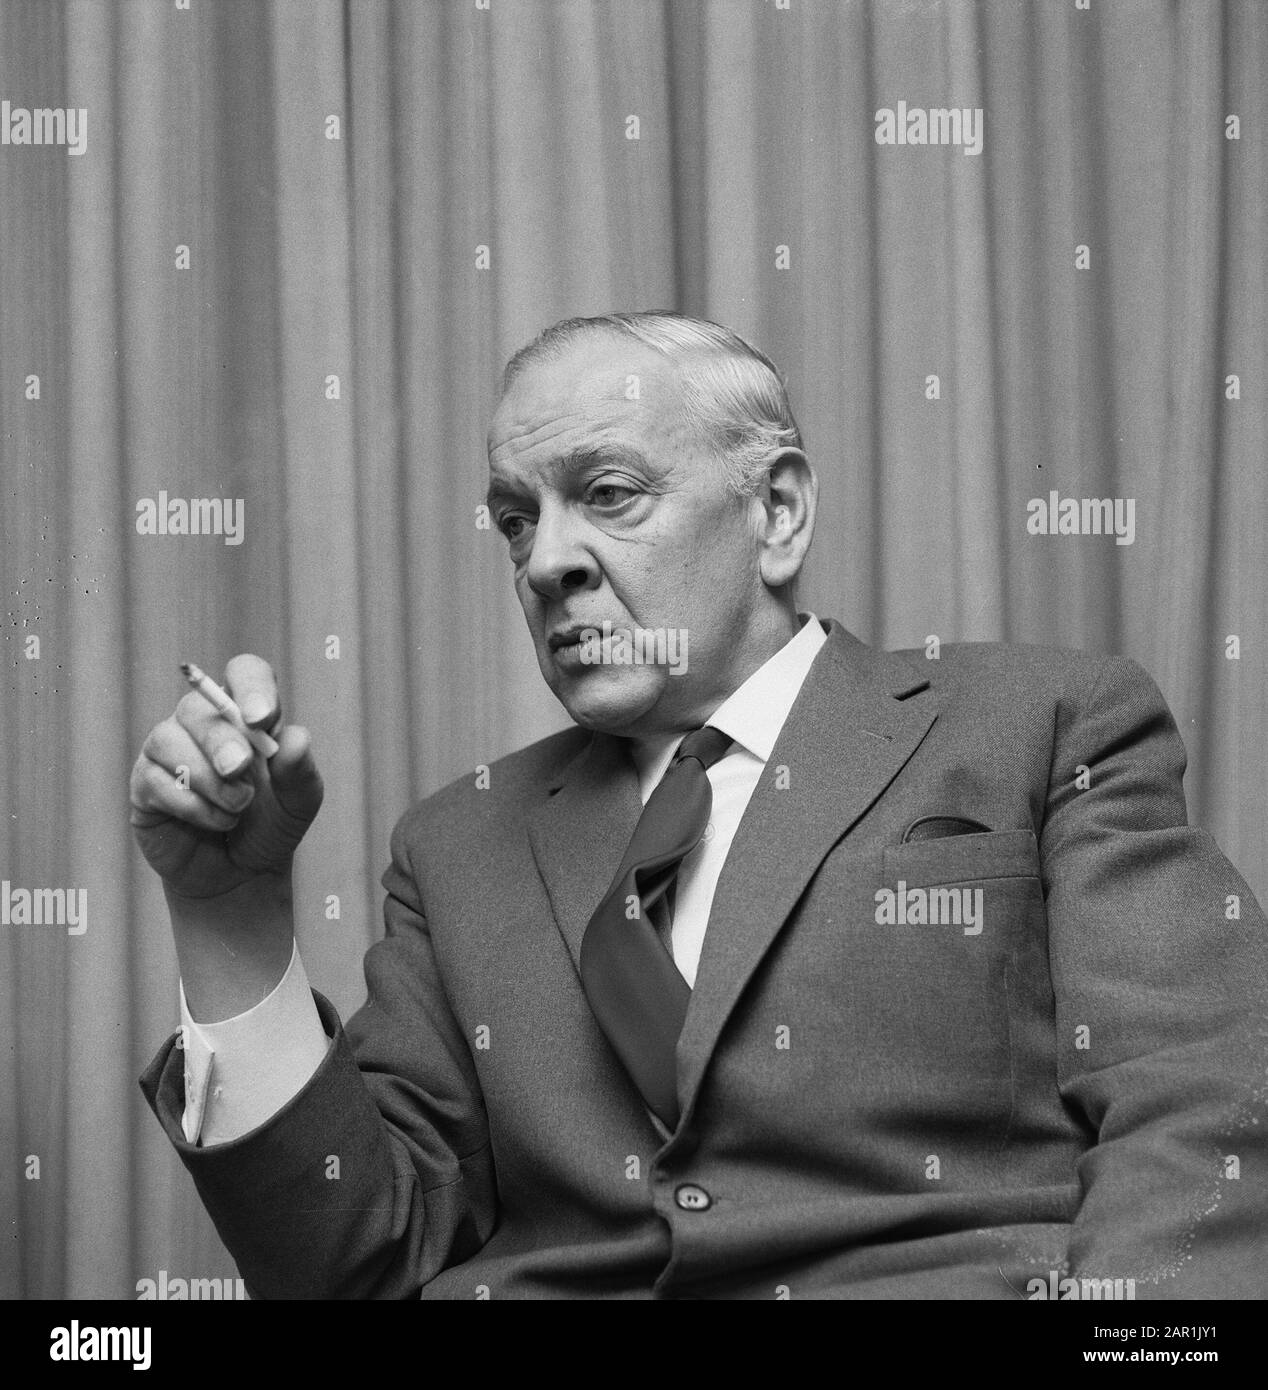 Press conference of the TROS (Television & Radio Omroep Foundation) in  Nieuwspoort in The Hague; director Joop Landré Date: 17 December 1965  Location: The Hague, Zuid-Holland Keywords: directors , press conferences,  smoking